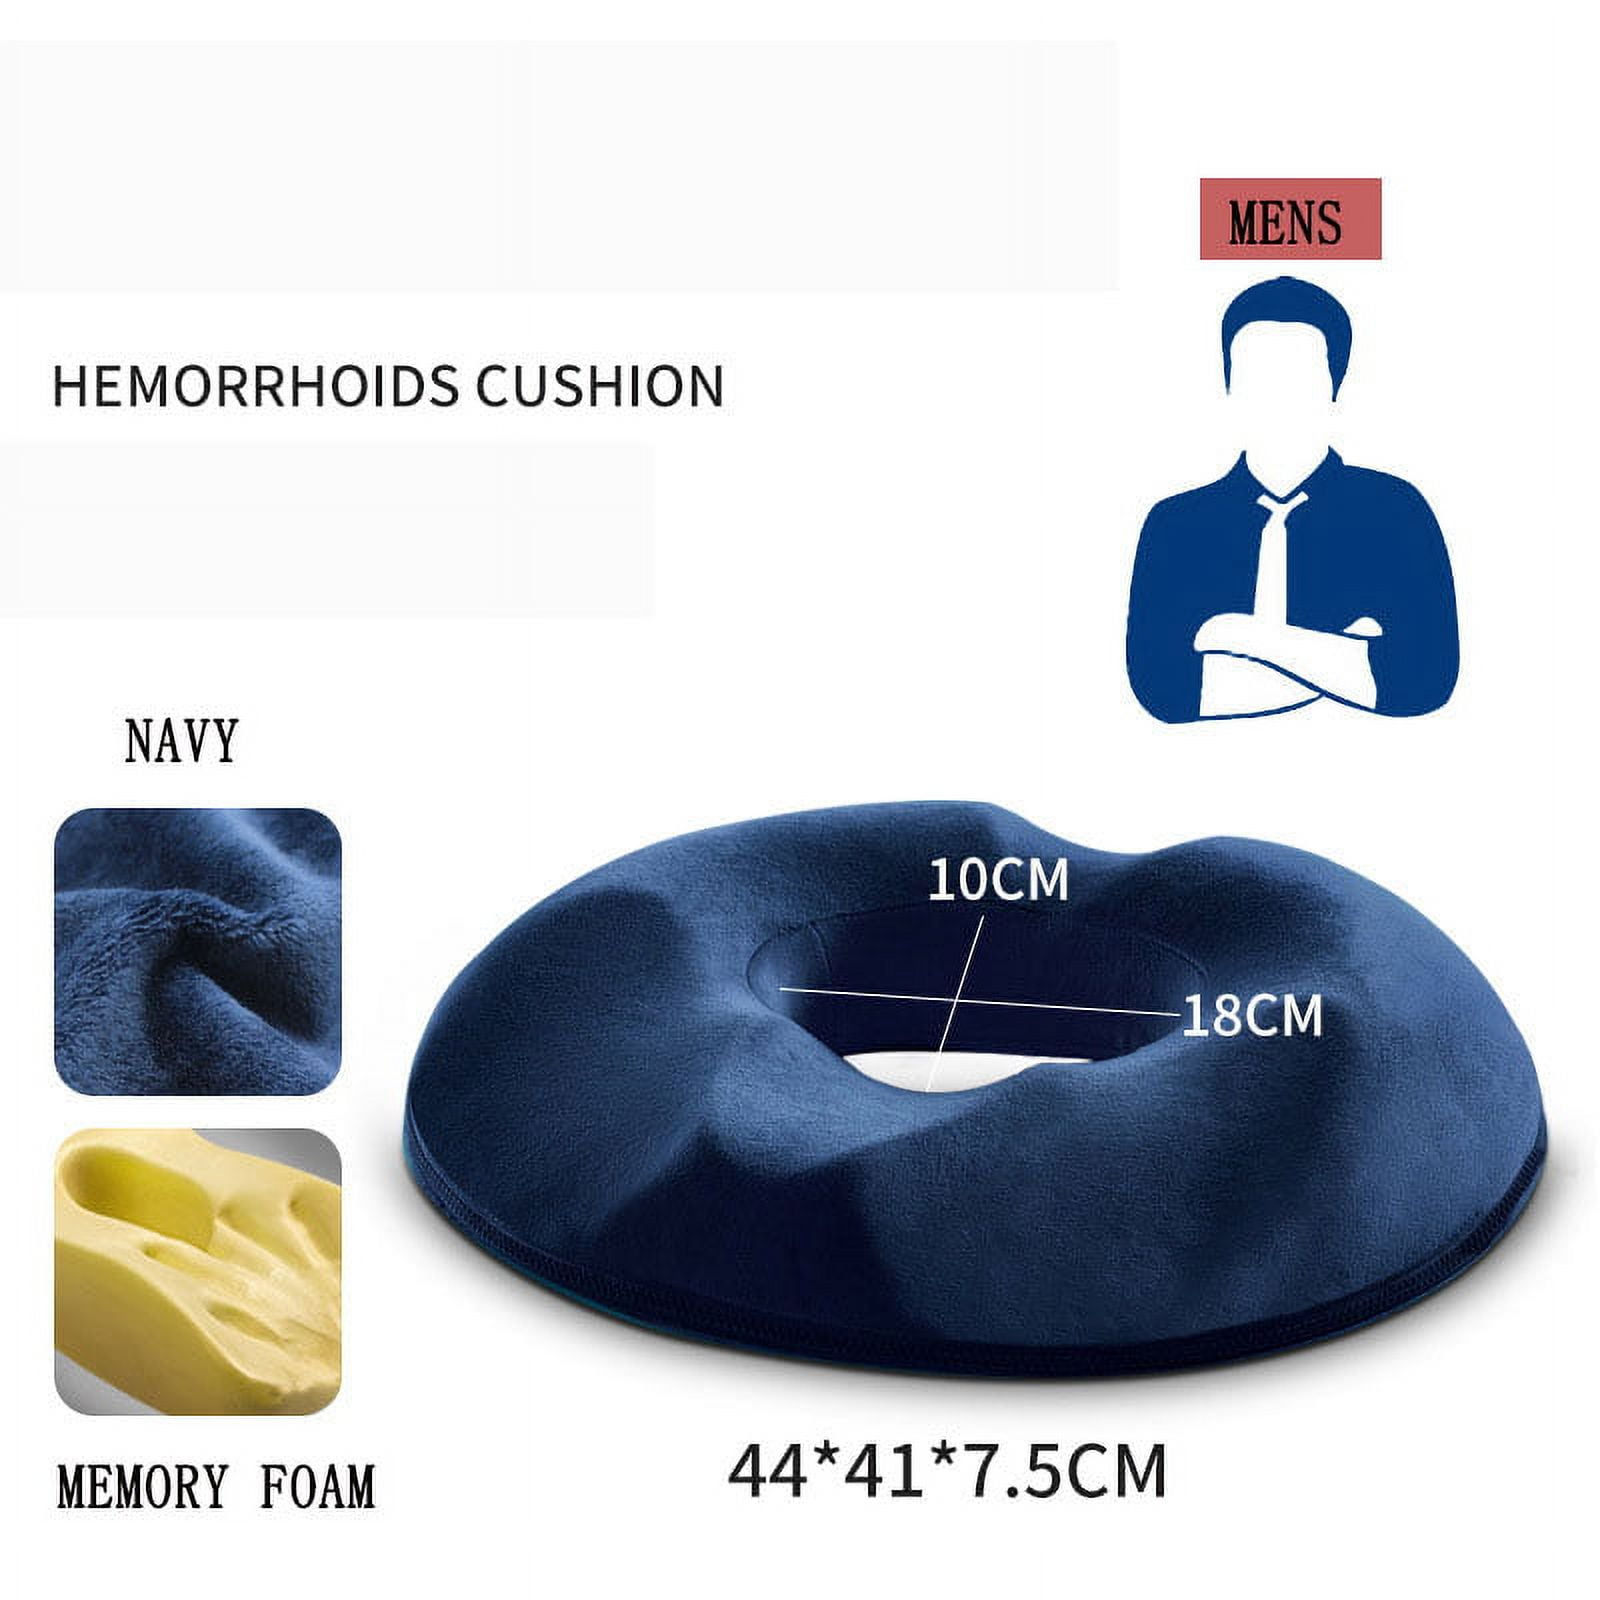 Donut Seat Cushion Firm Pillow for Hemorrhoids, Prostate, Pregnancy,  Pressure Sores, Post Surgery